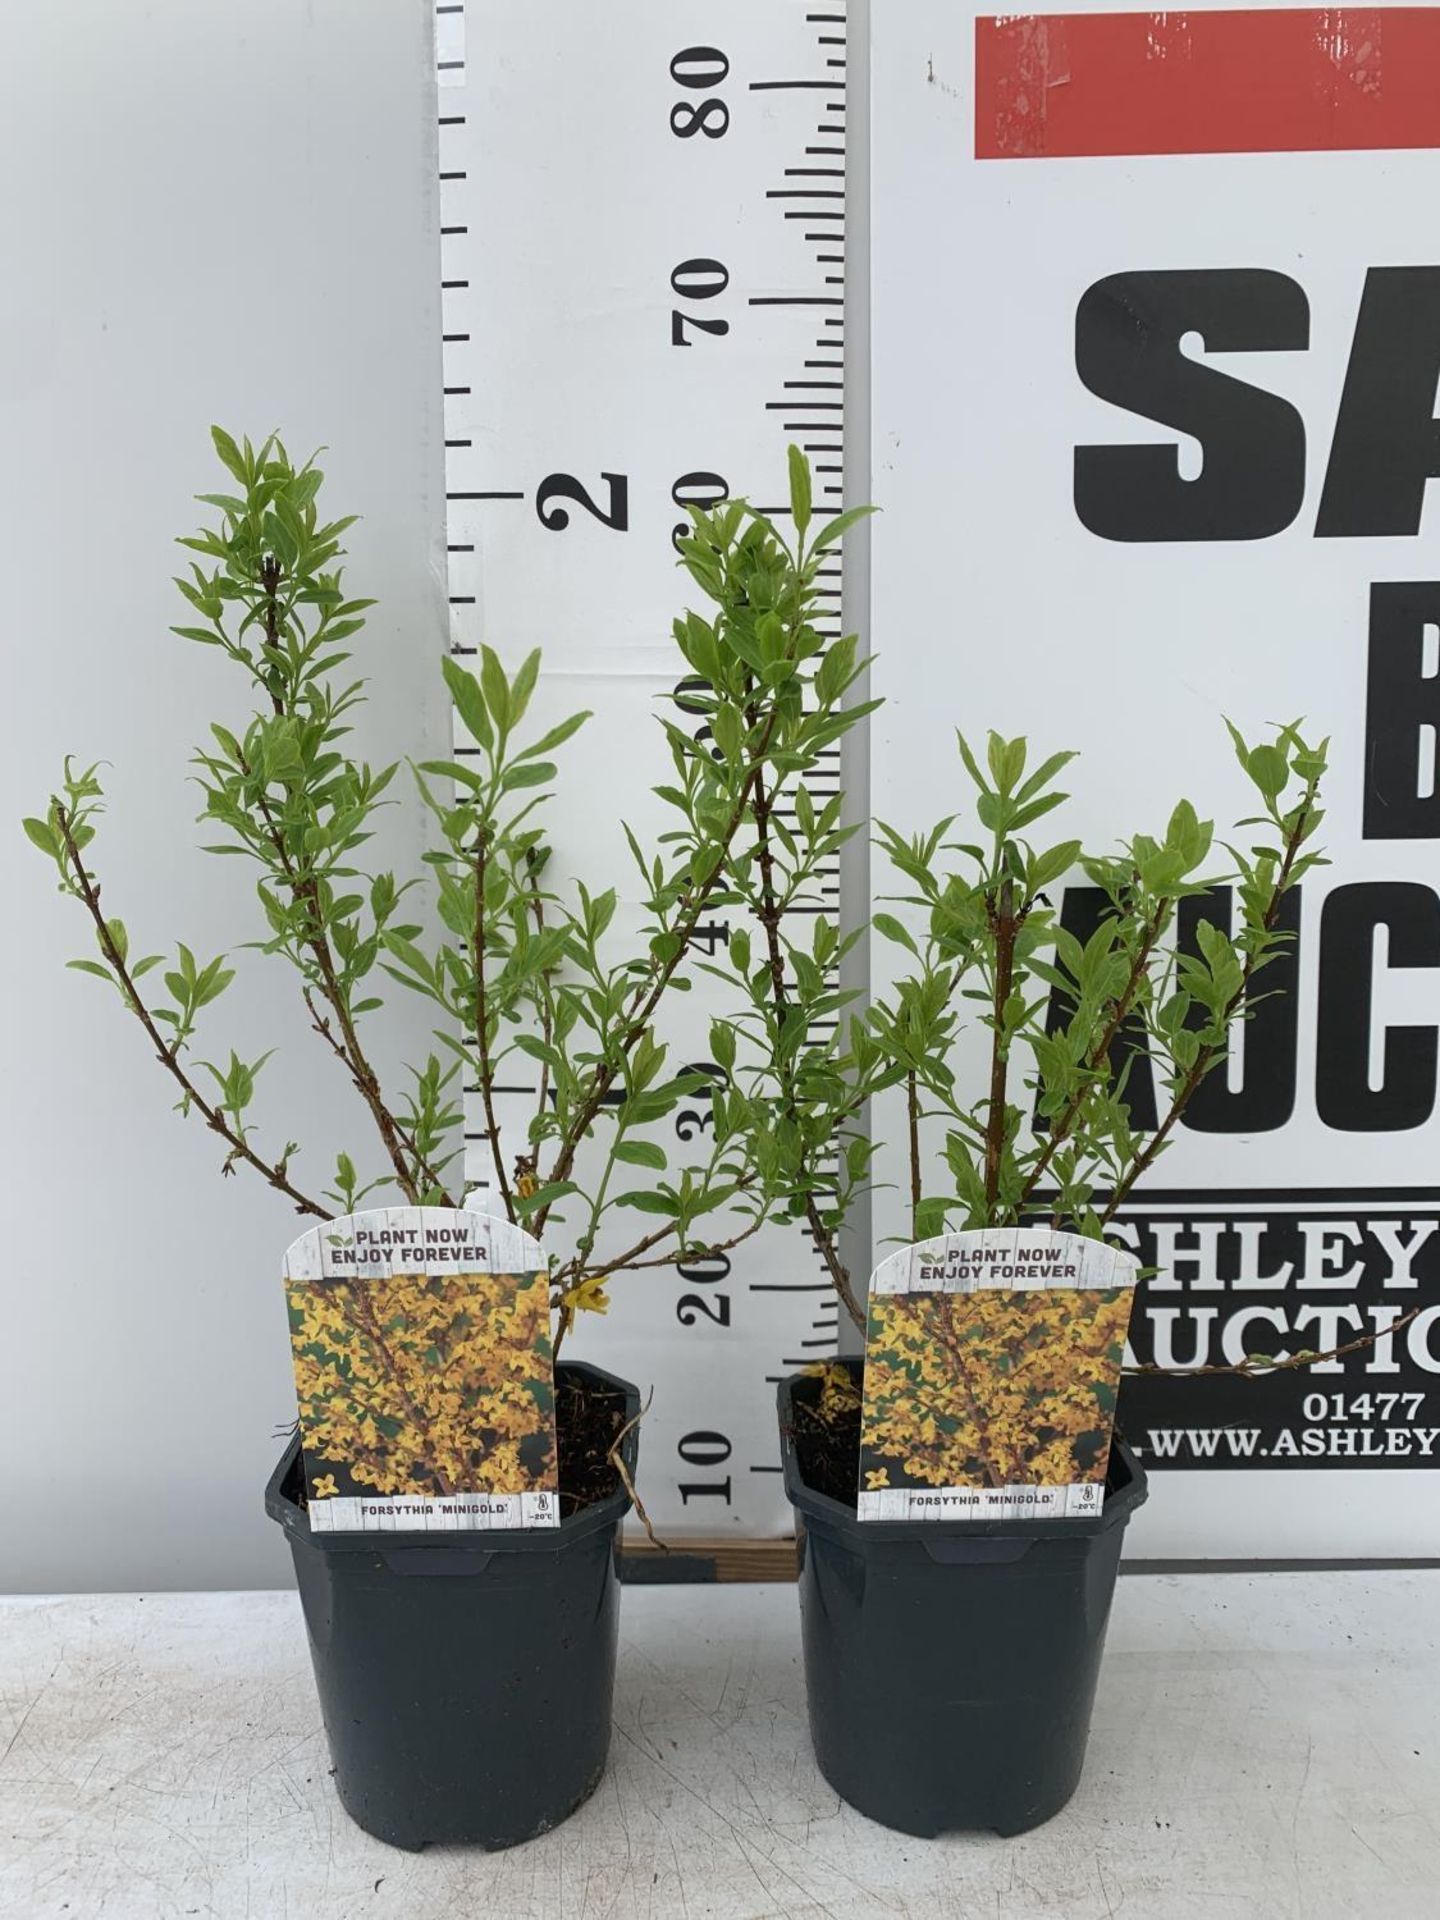 TWO FORSYTHIA 'MINIGOLD' APPROX 60CM IN HEIGHT IN 2 LTR POTS PLUS VAT TO BE SOLD FOR THE TWO